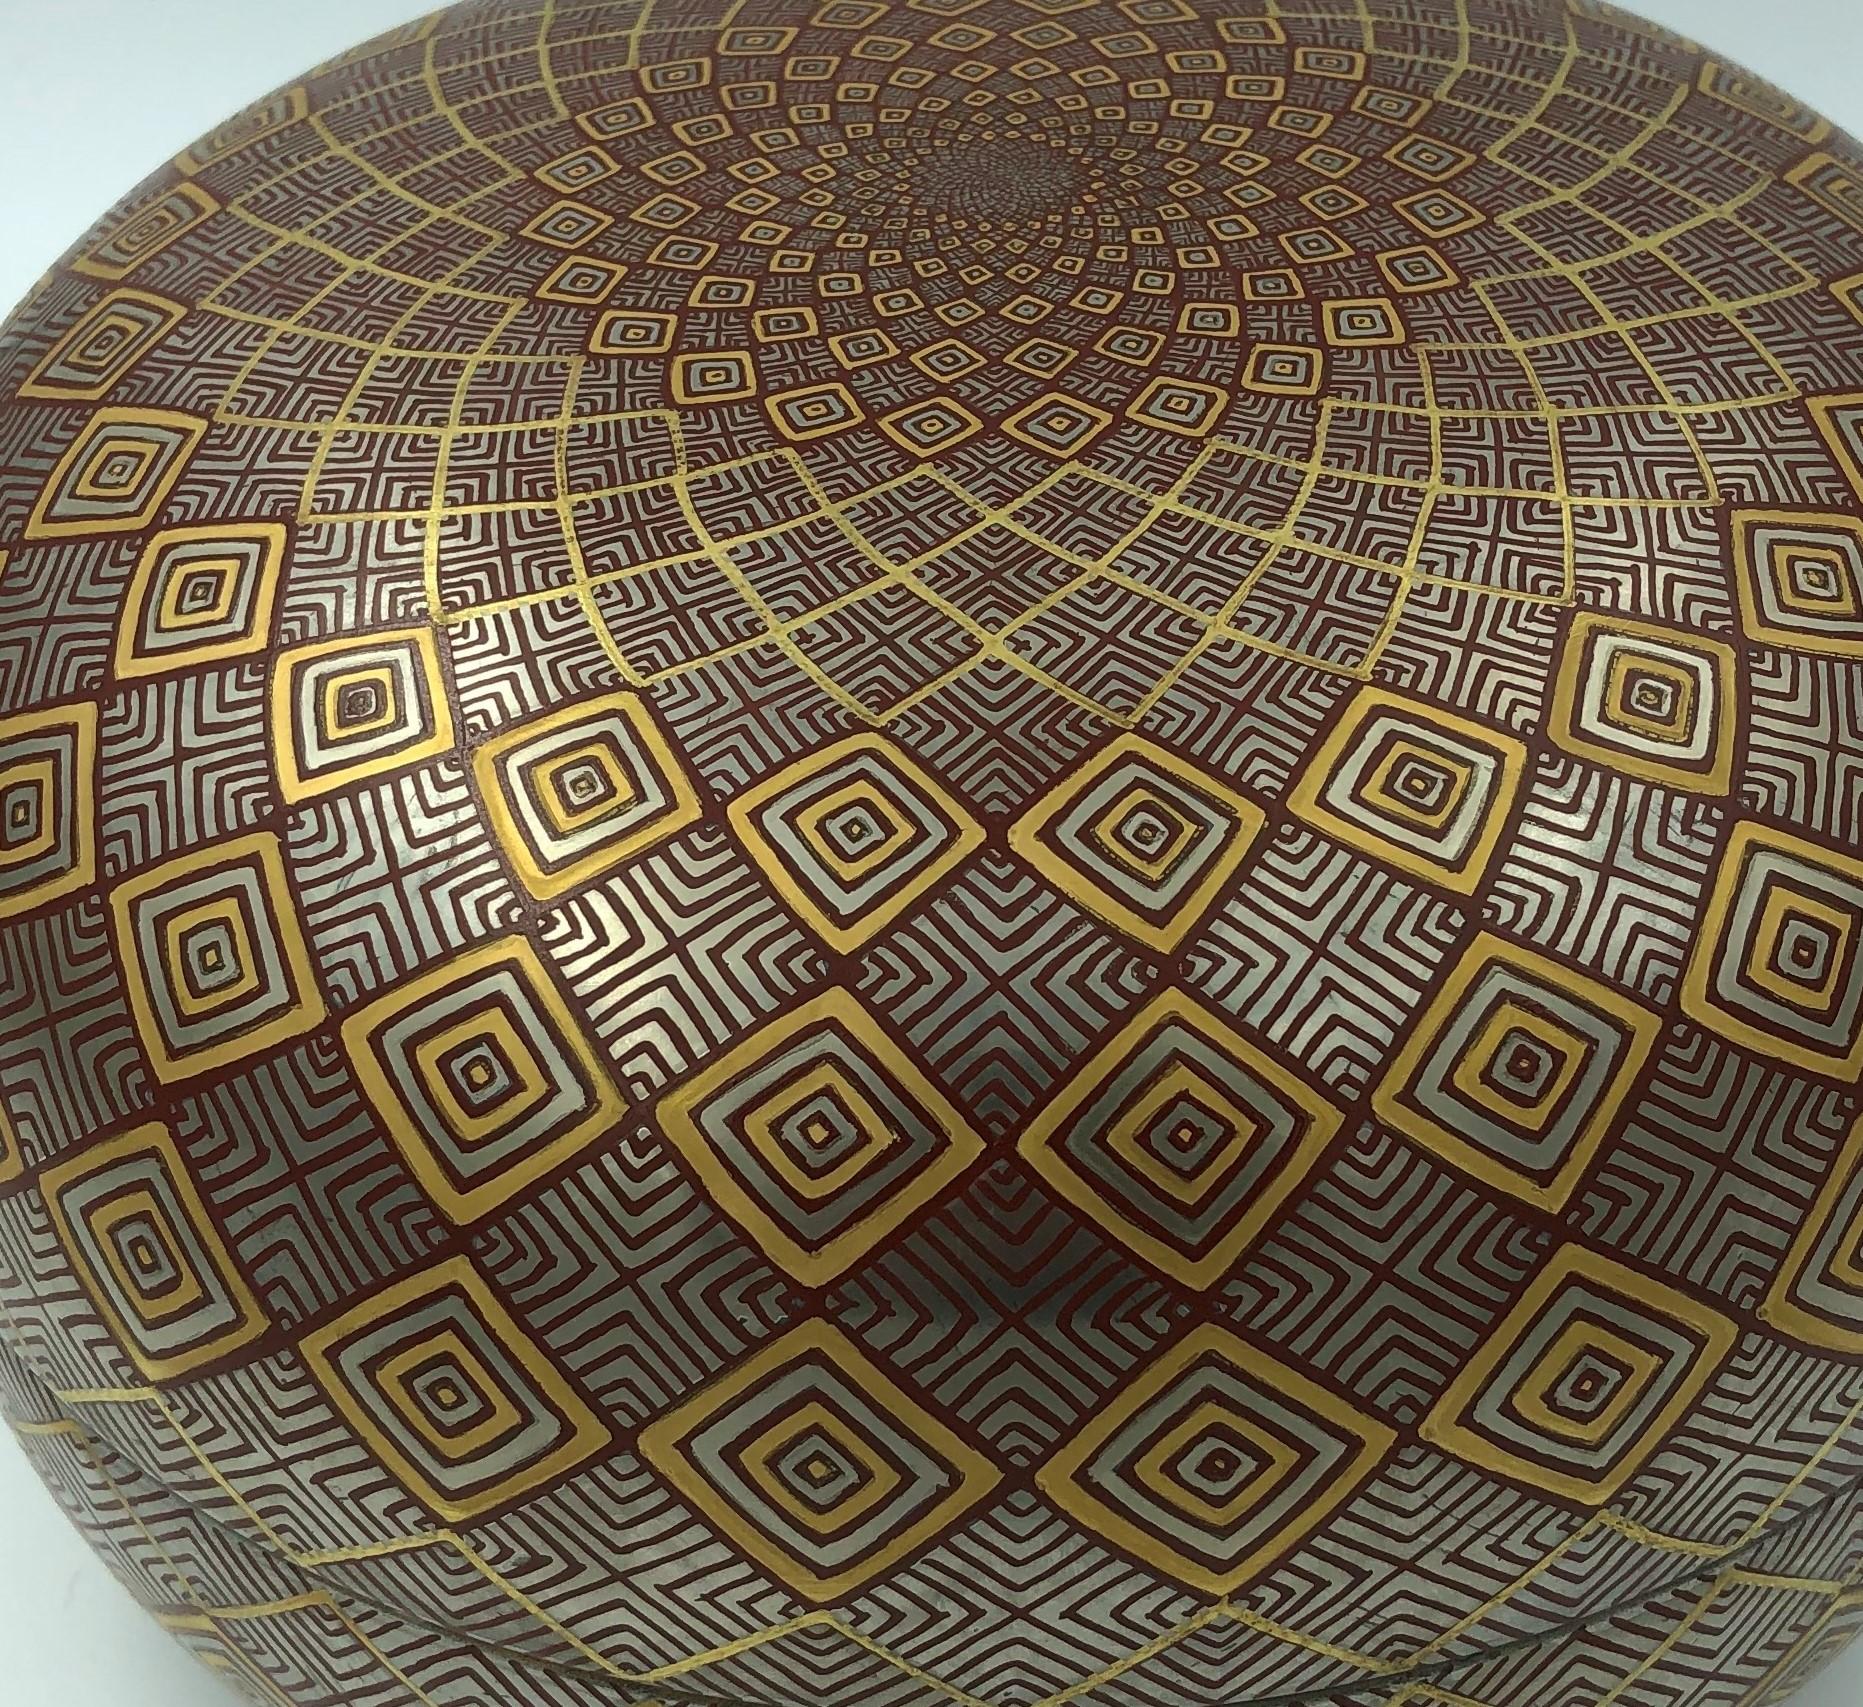 Mesmerizing Japanese contemporary decorative porcelain box, extremely intricately platinum and gold gilded and hand painted on an exquisite ovoid shape body, featuring an extremely intricate geometric progression expressed in red, gold and platinum.